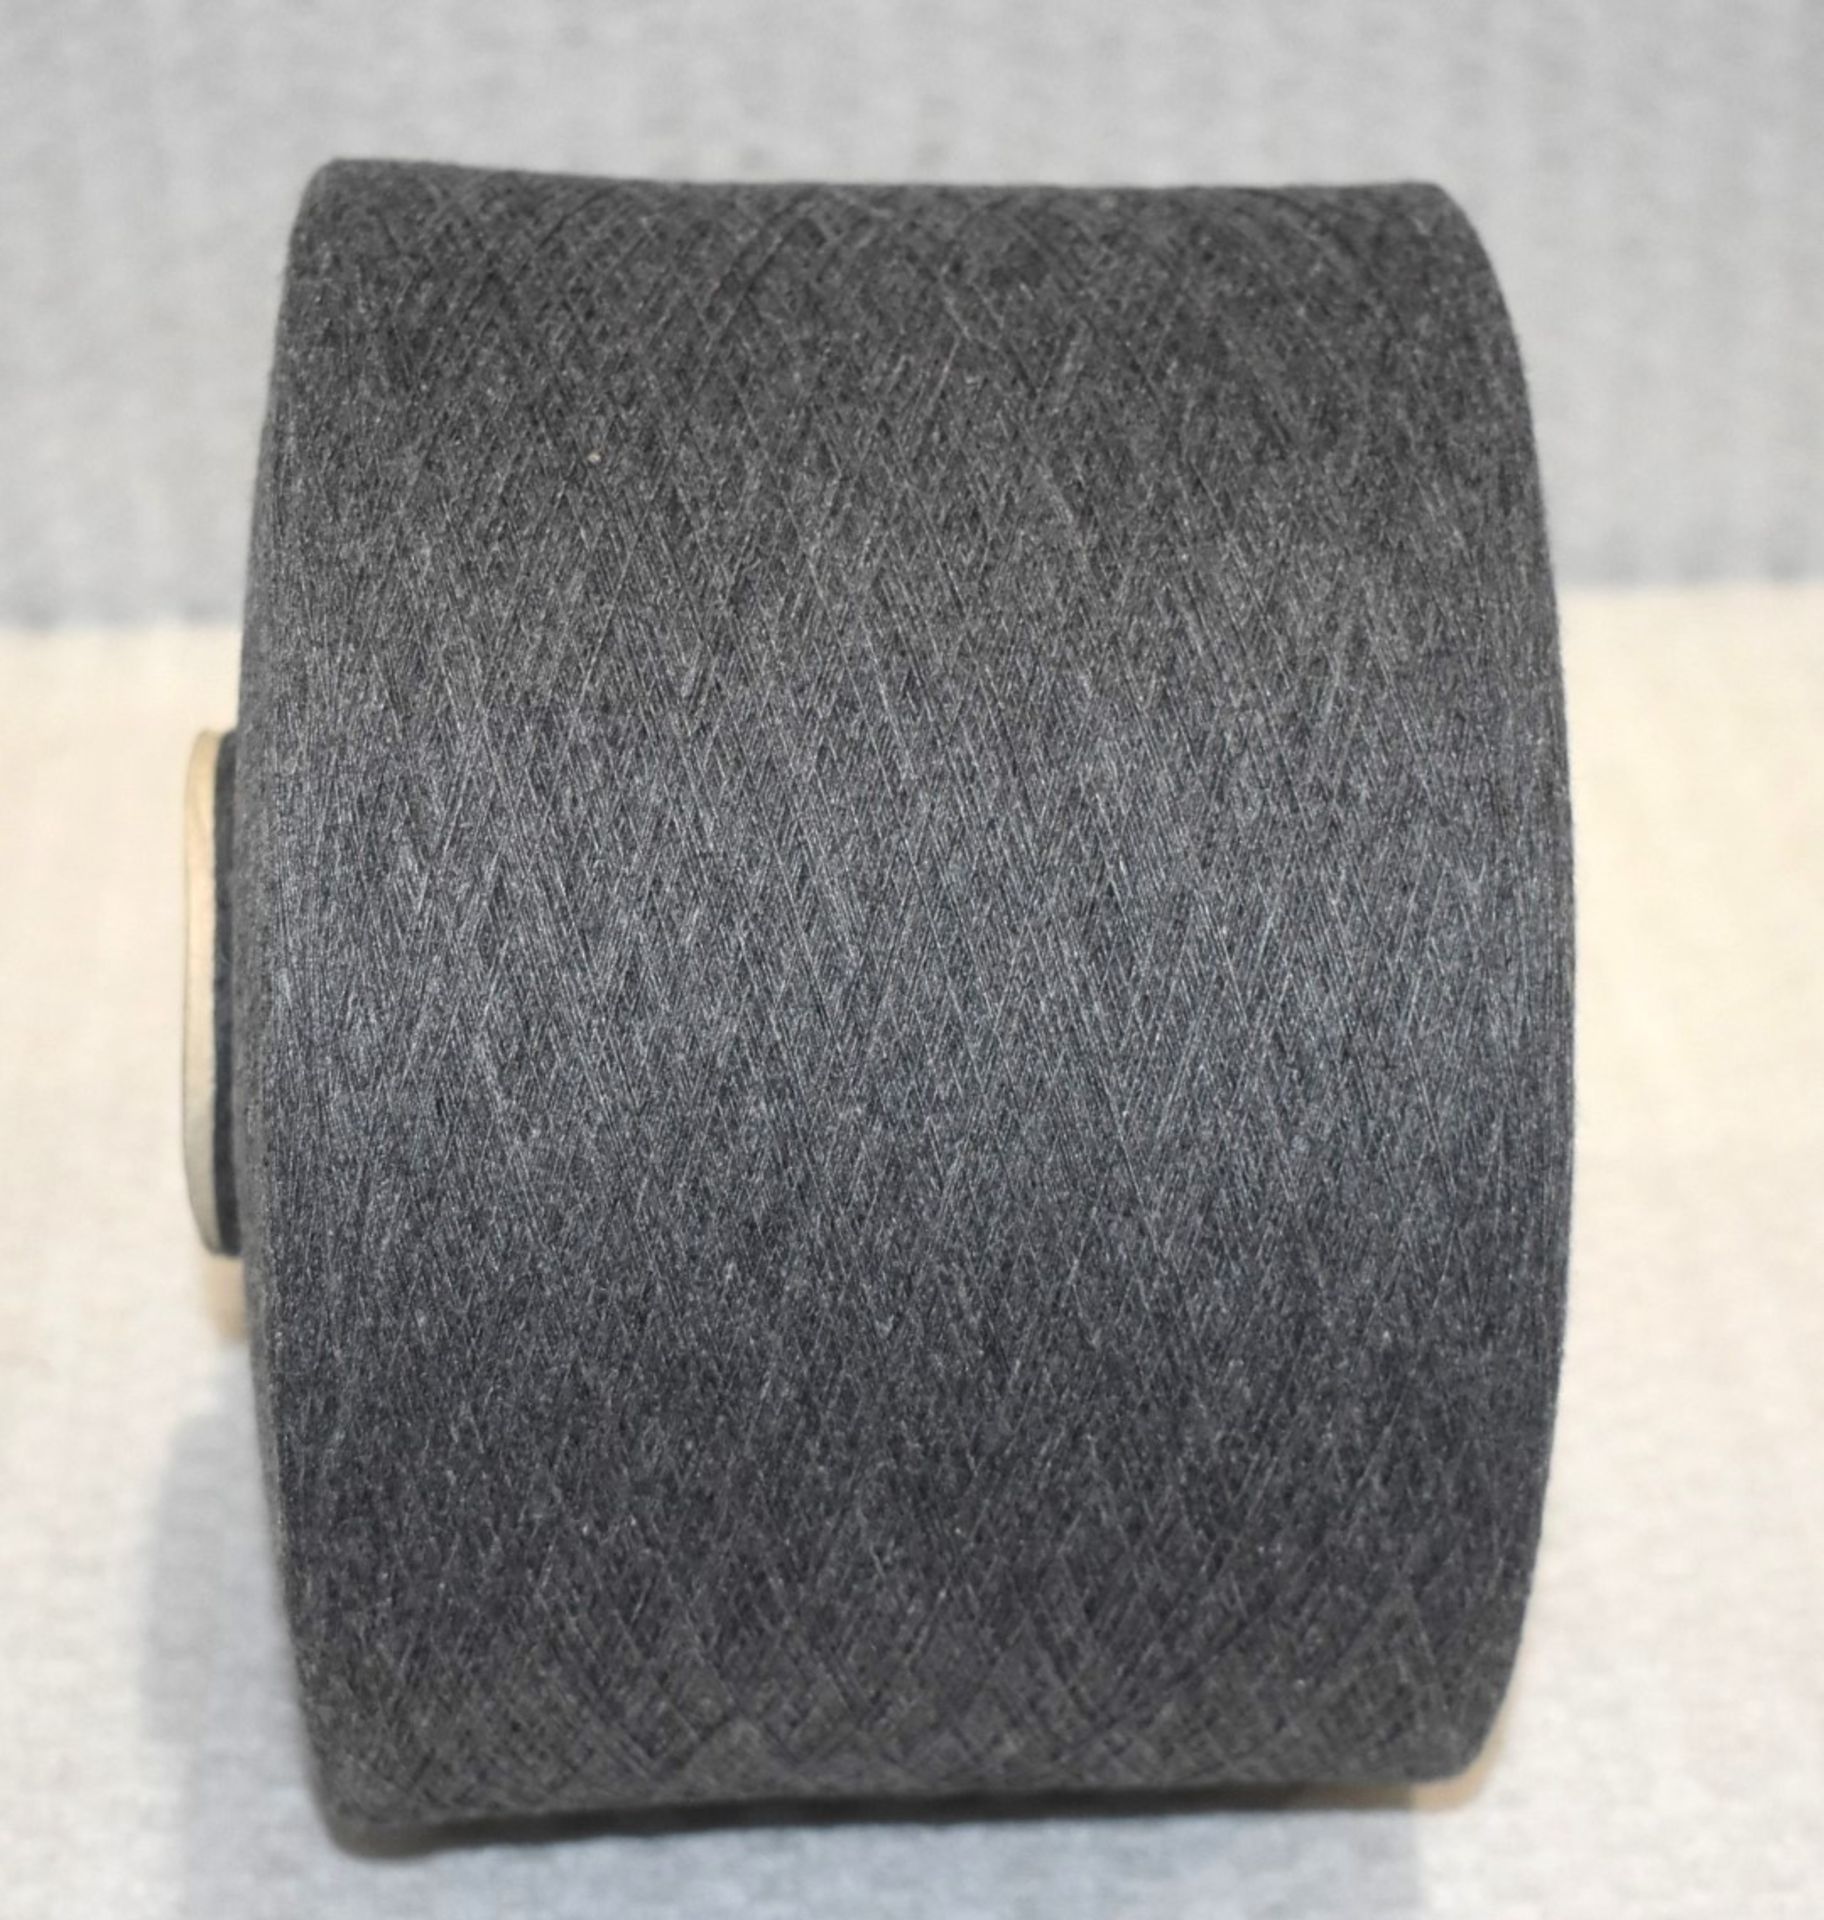 18 x Cones of 1/13 MicroCotton Knitting Yarn - Mid Grey - Approx Weight: 2,500g - New Stock ABL Yarn - Image 15 of 16